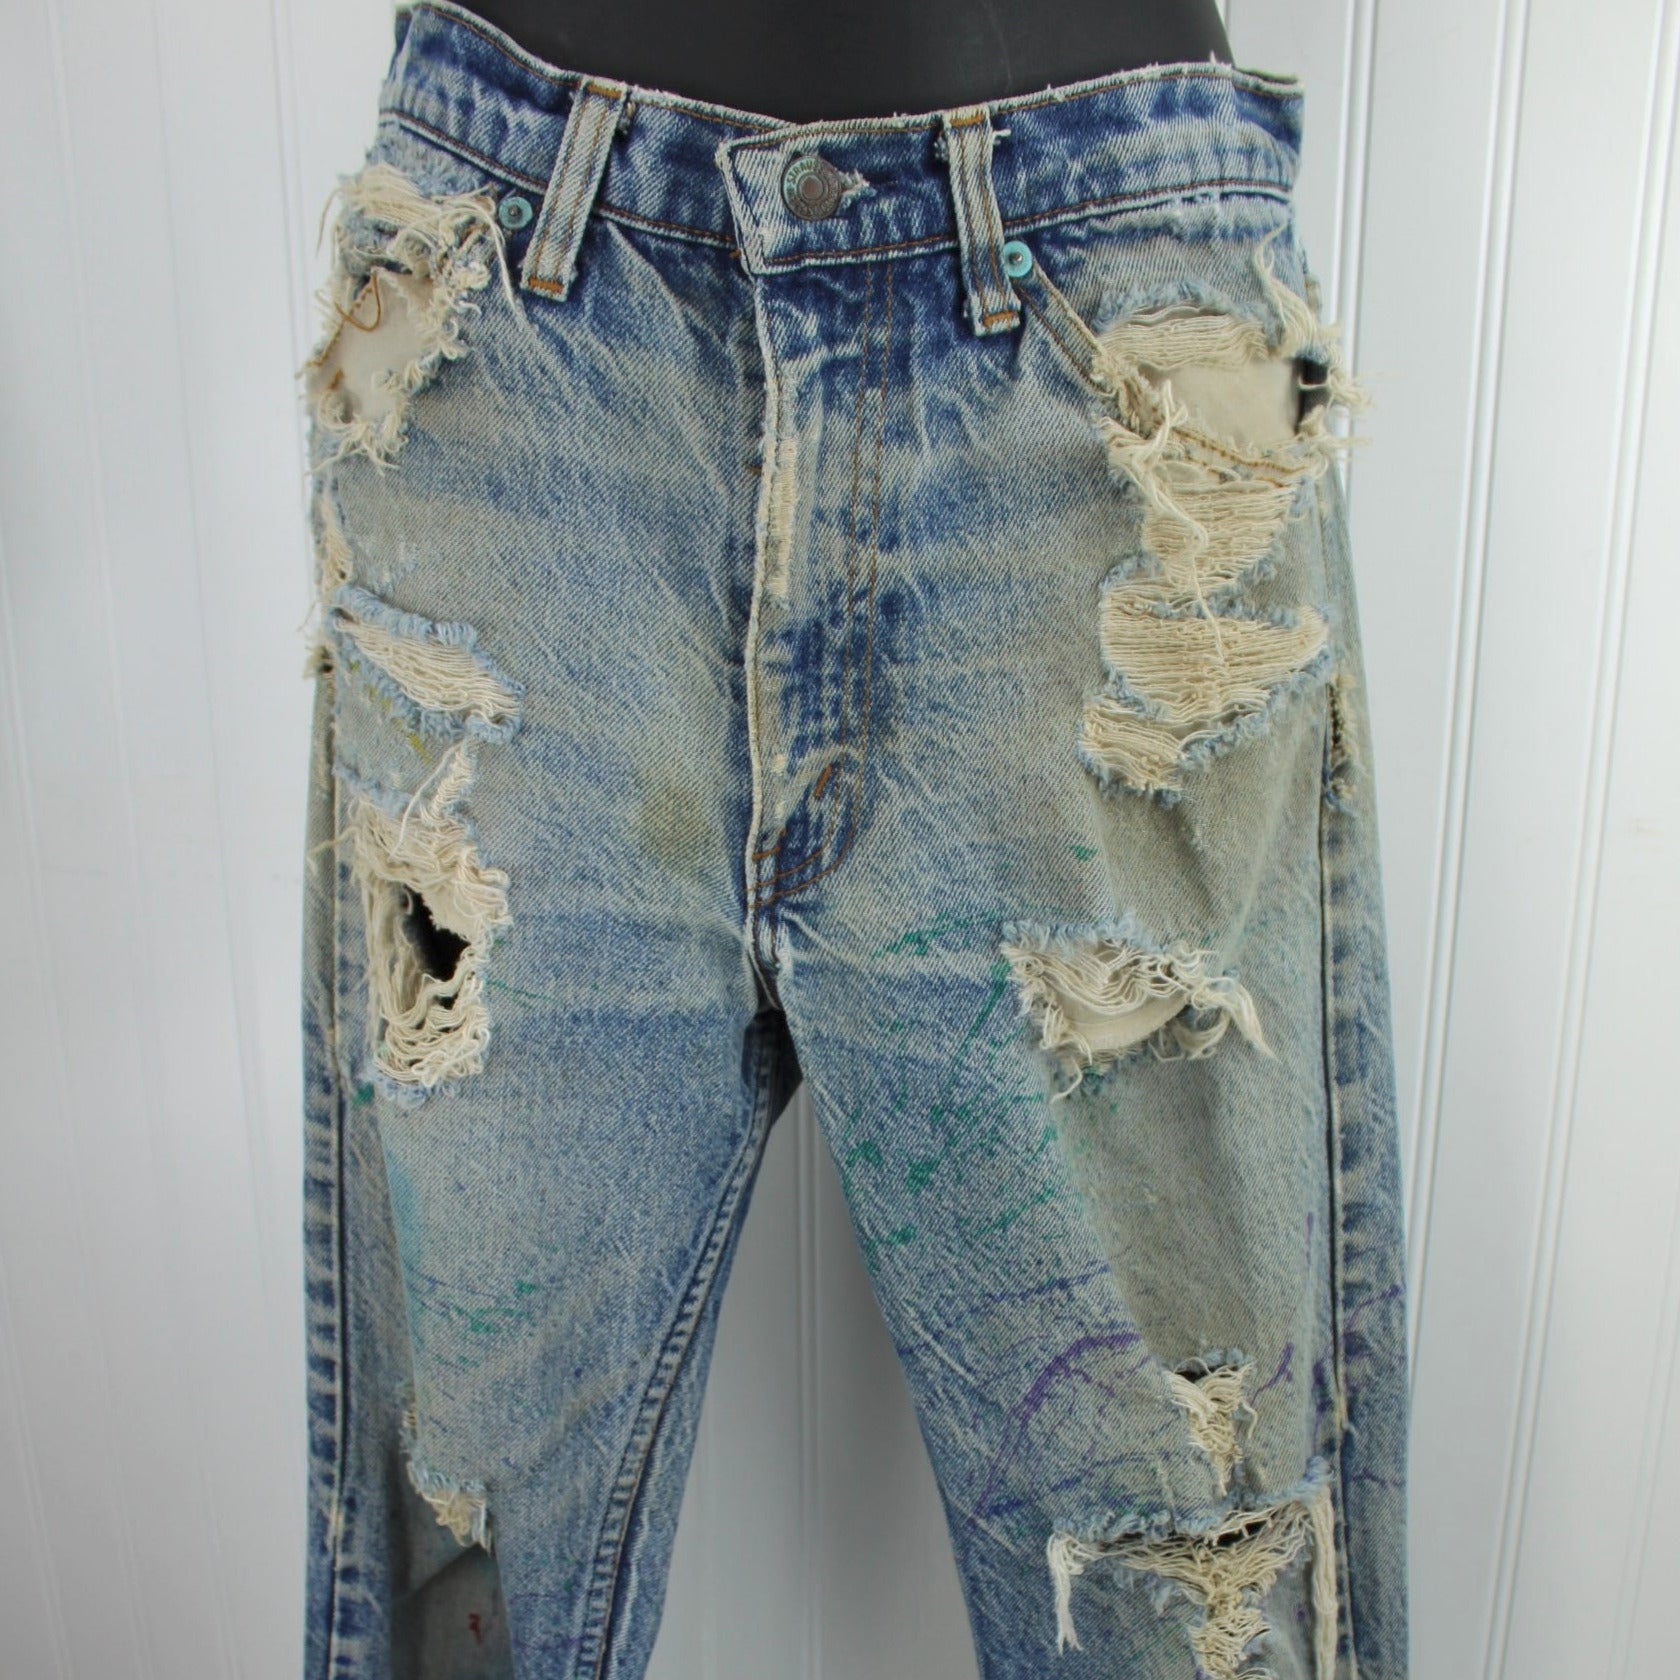 Vintage Levi's Skate Boarder Superbly Distressed Painted Jeans - Early 1990s - Waist 30" Orange Tab collectible